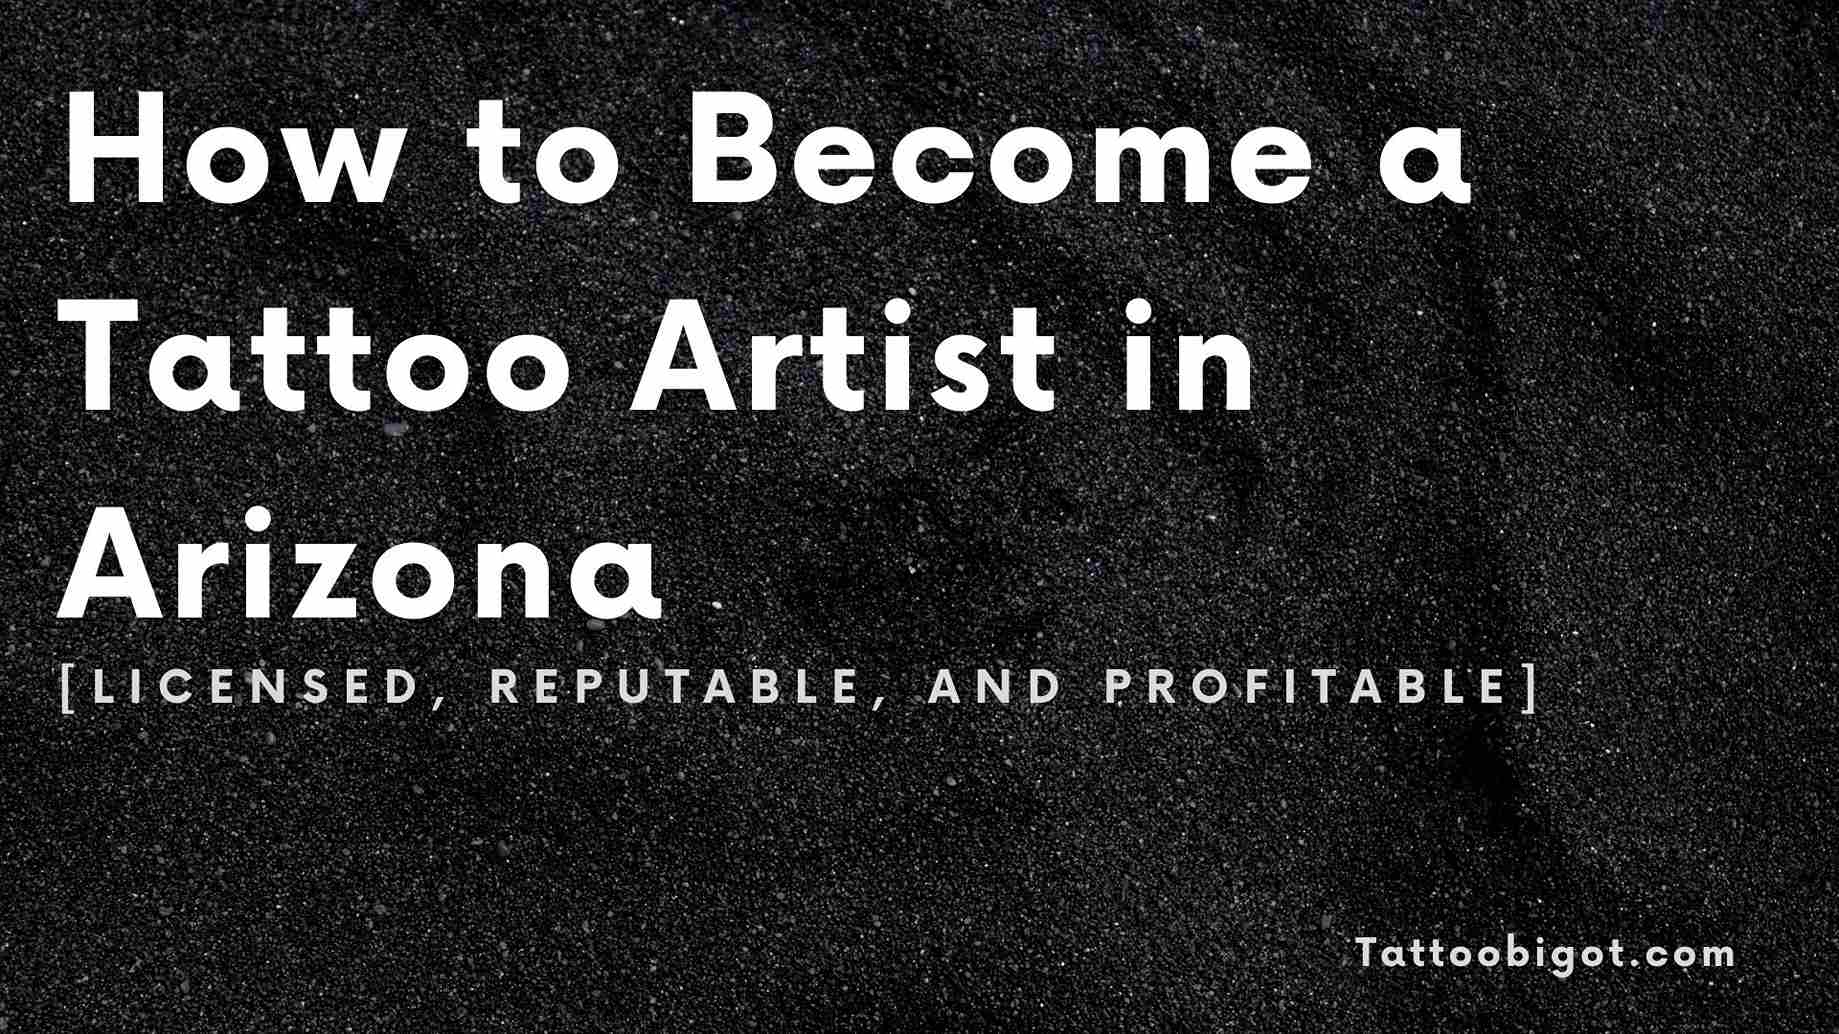 How to Become a Tattoo Artist in Arizona